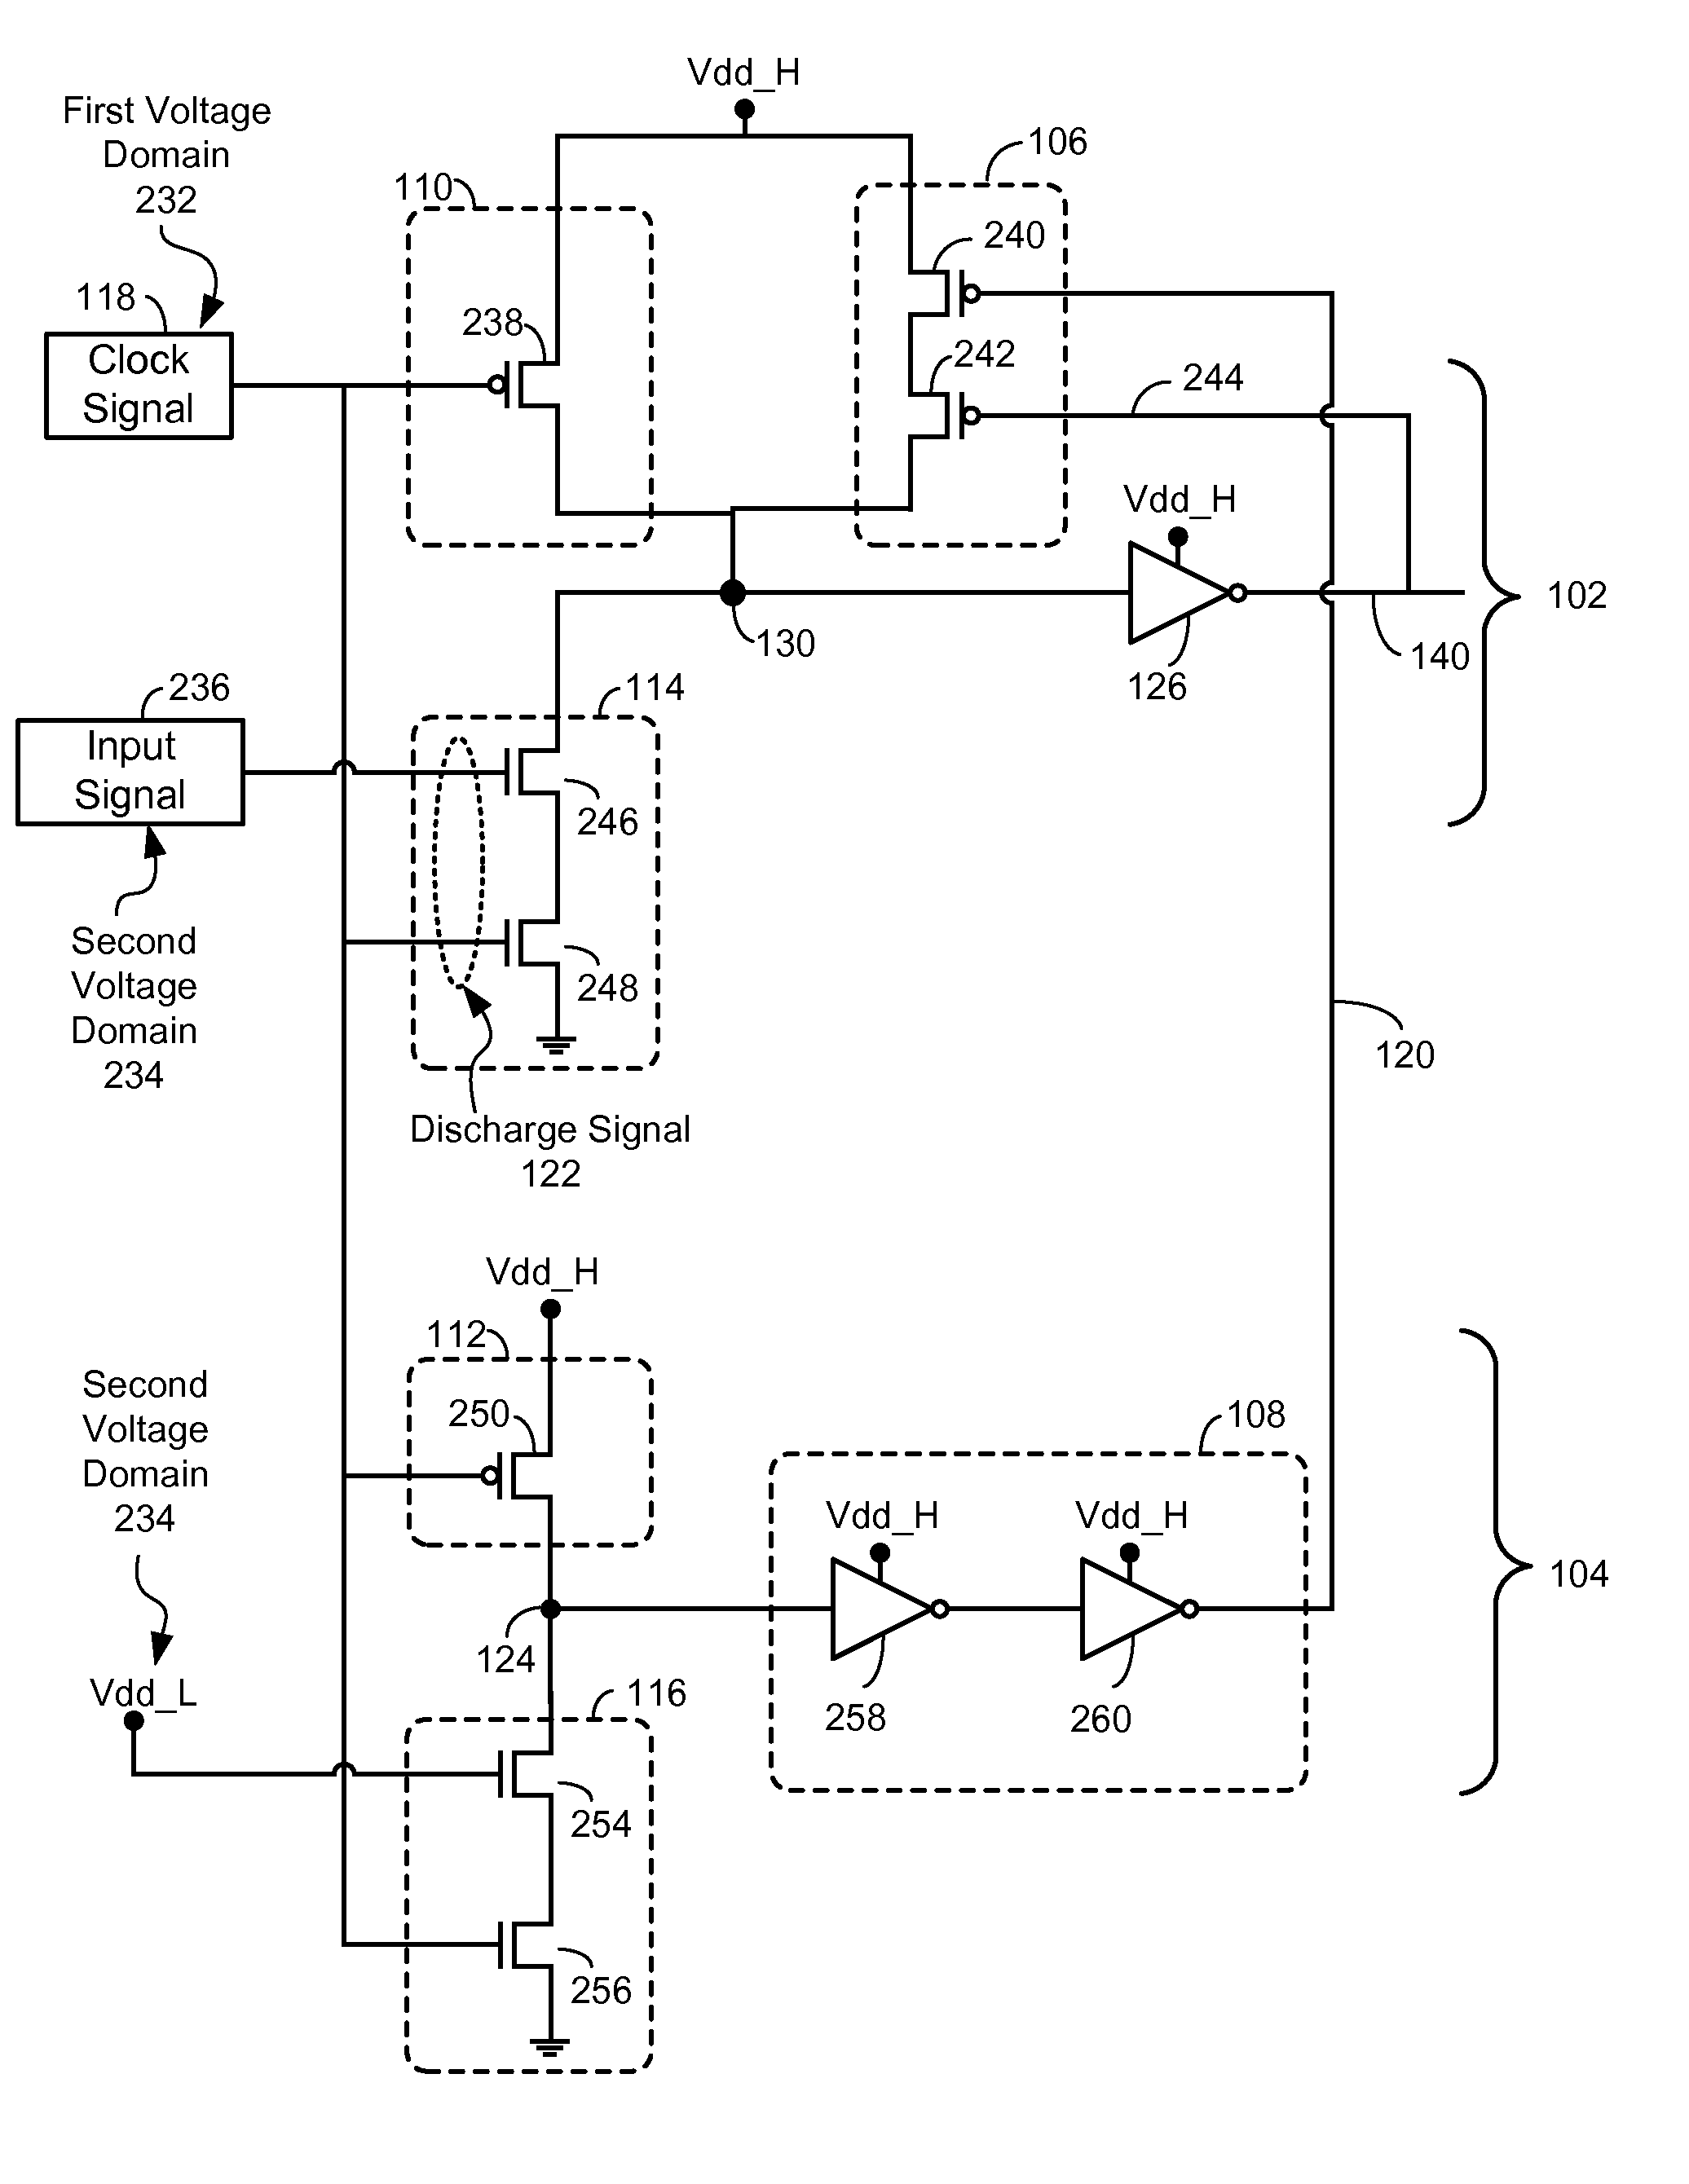 Voltage level shifter with dynamic circuit structure having discharge delay tracking